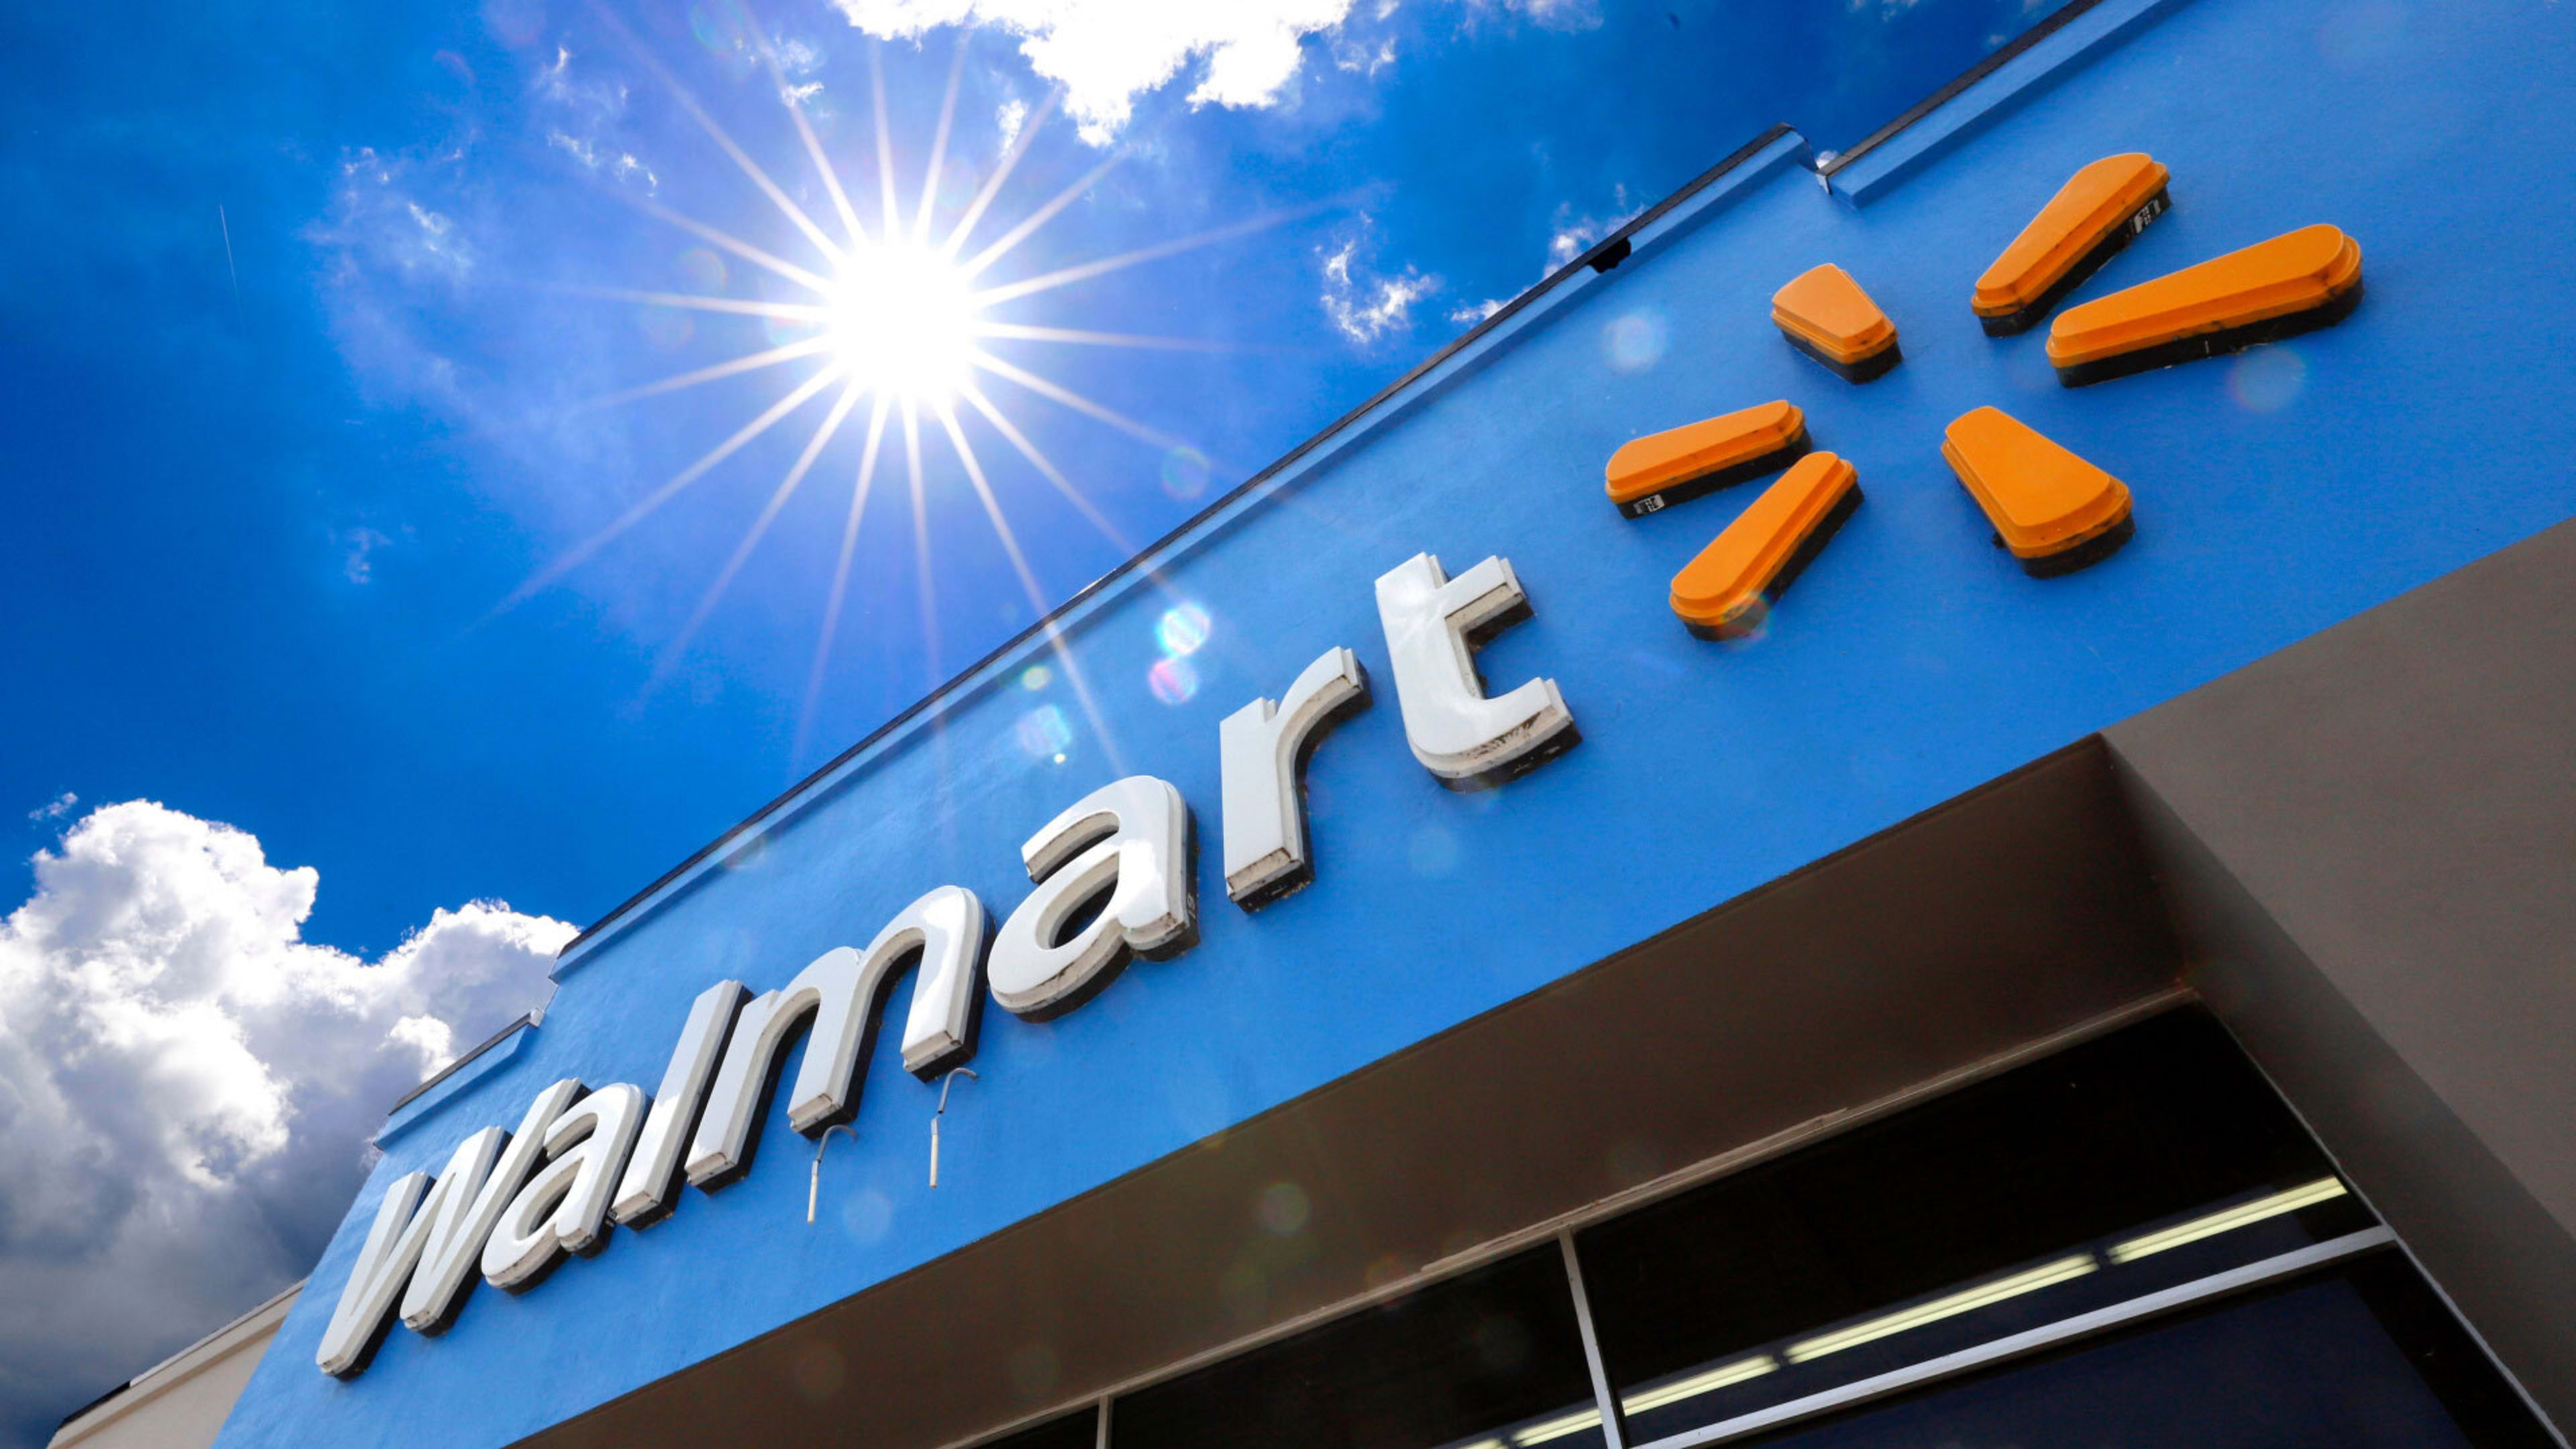 Walmart Q2 earnings: Sales are up 6%, even as Target slumps. Here’s why